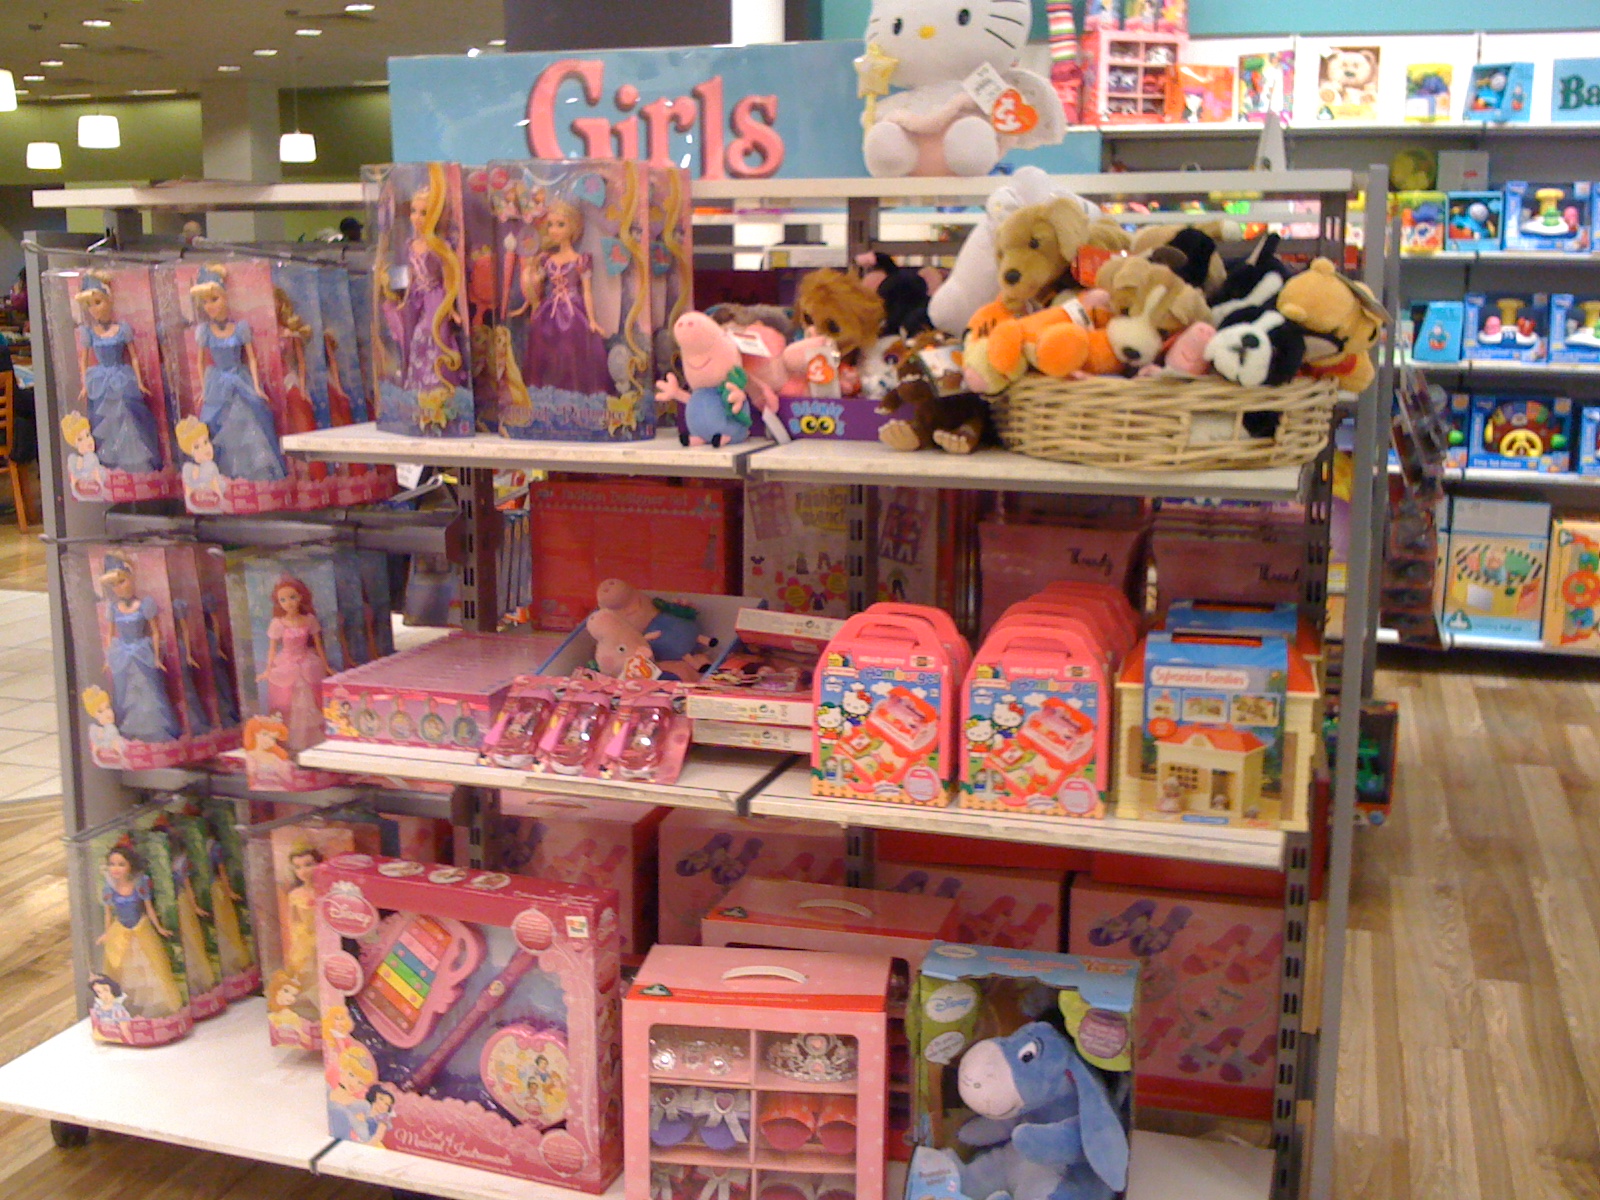 Store shelves filled with pink and purple colors and girls’ toys.^[[Image](https://www.flickr.com/photos/janetmck/6826070922) by [Janet McKnight](https://www.flickr.com/photos/janetmck/) is licensed under [CC BY 2.0](https://creativecommons.org/licenses/by/2.0/)]